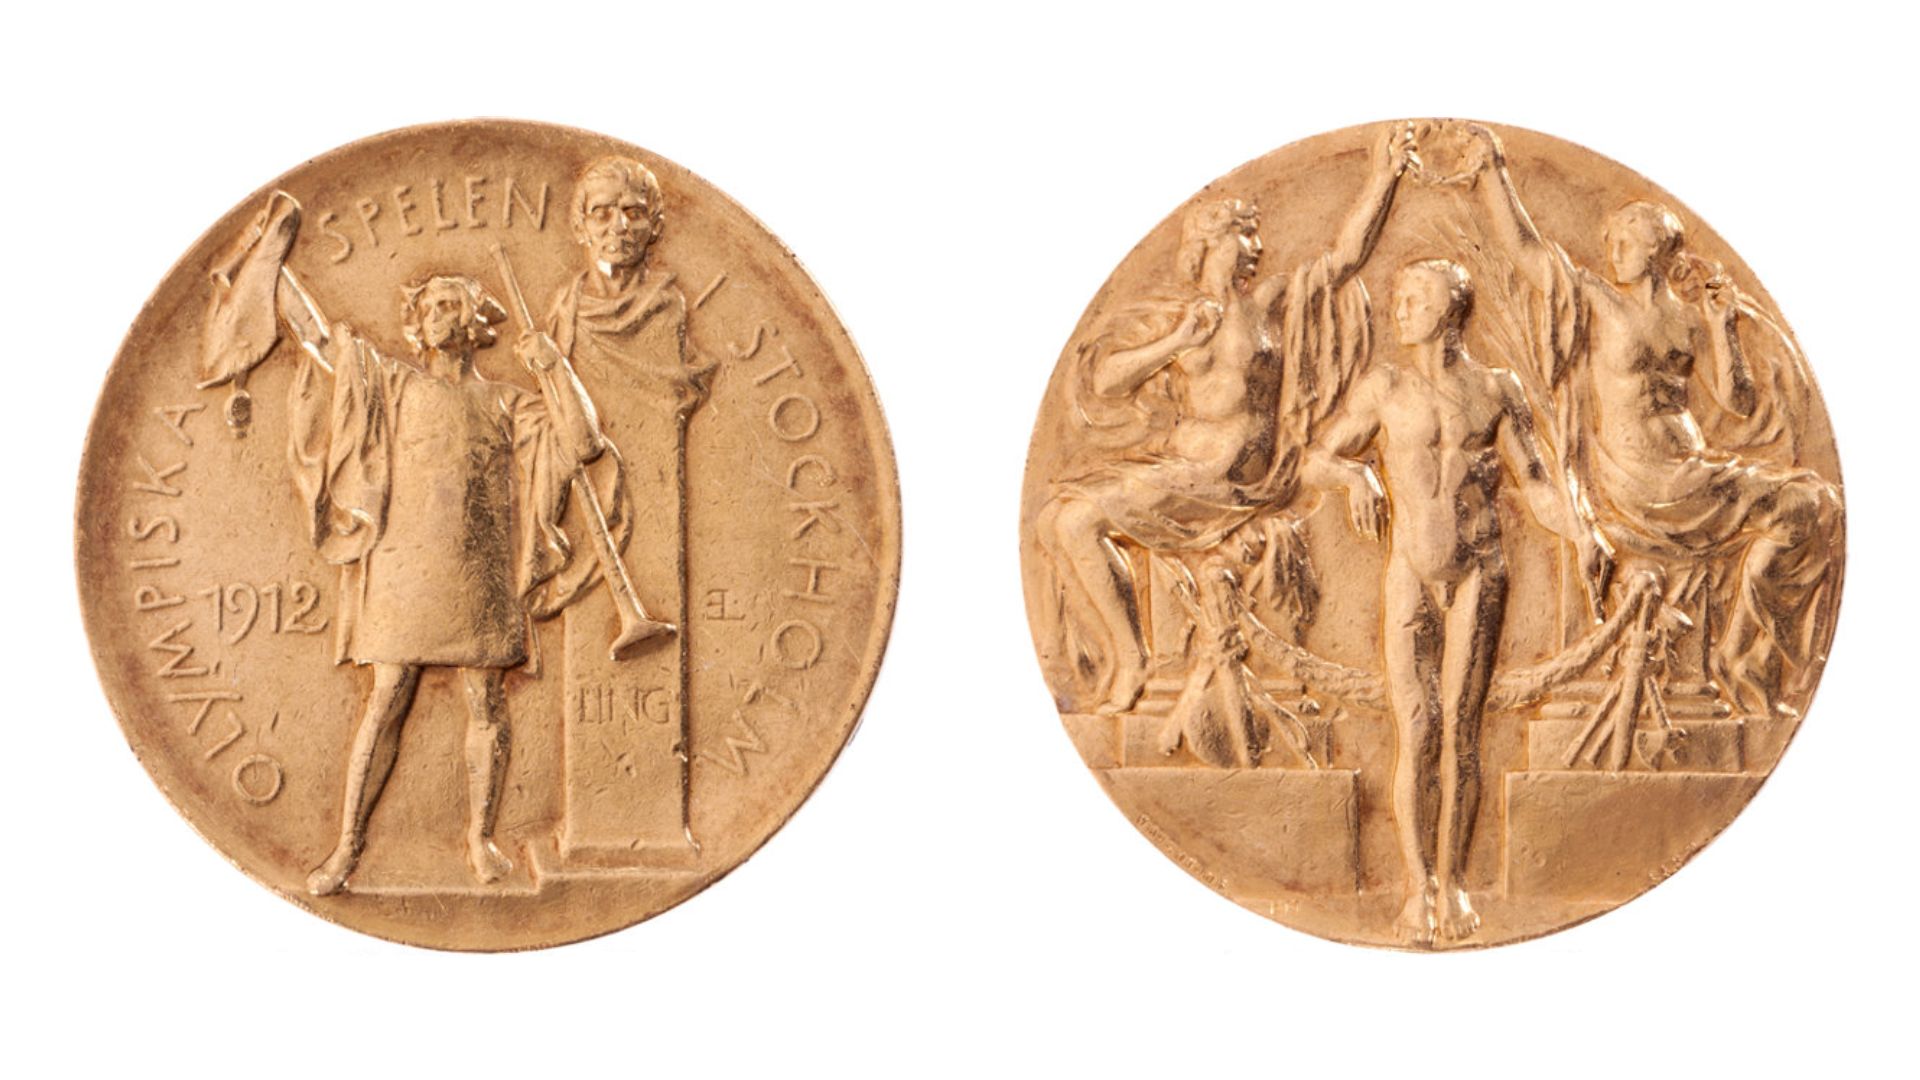 1912 Olympic medals